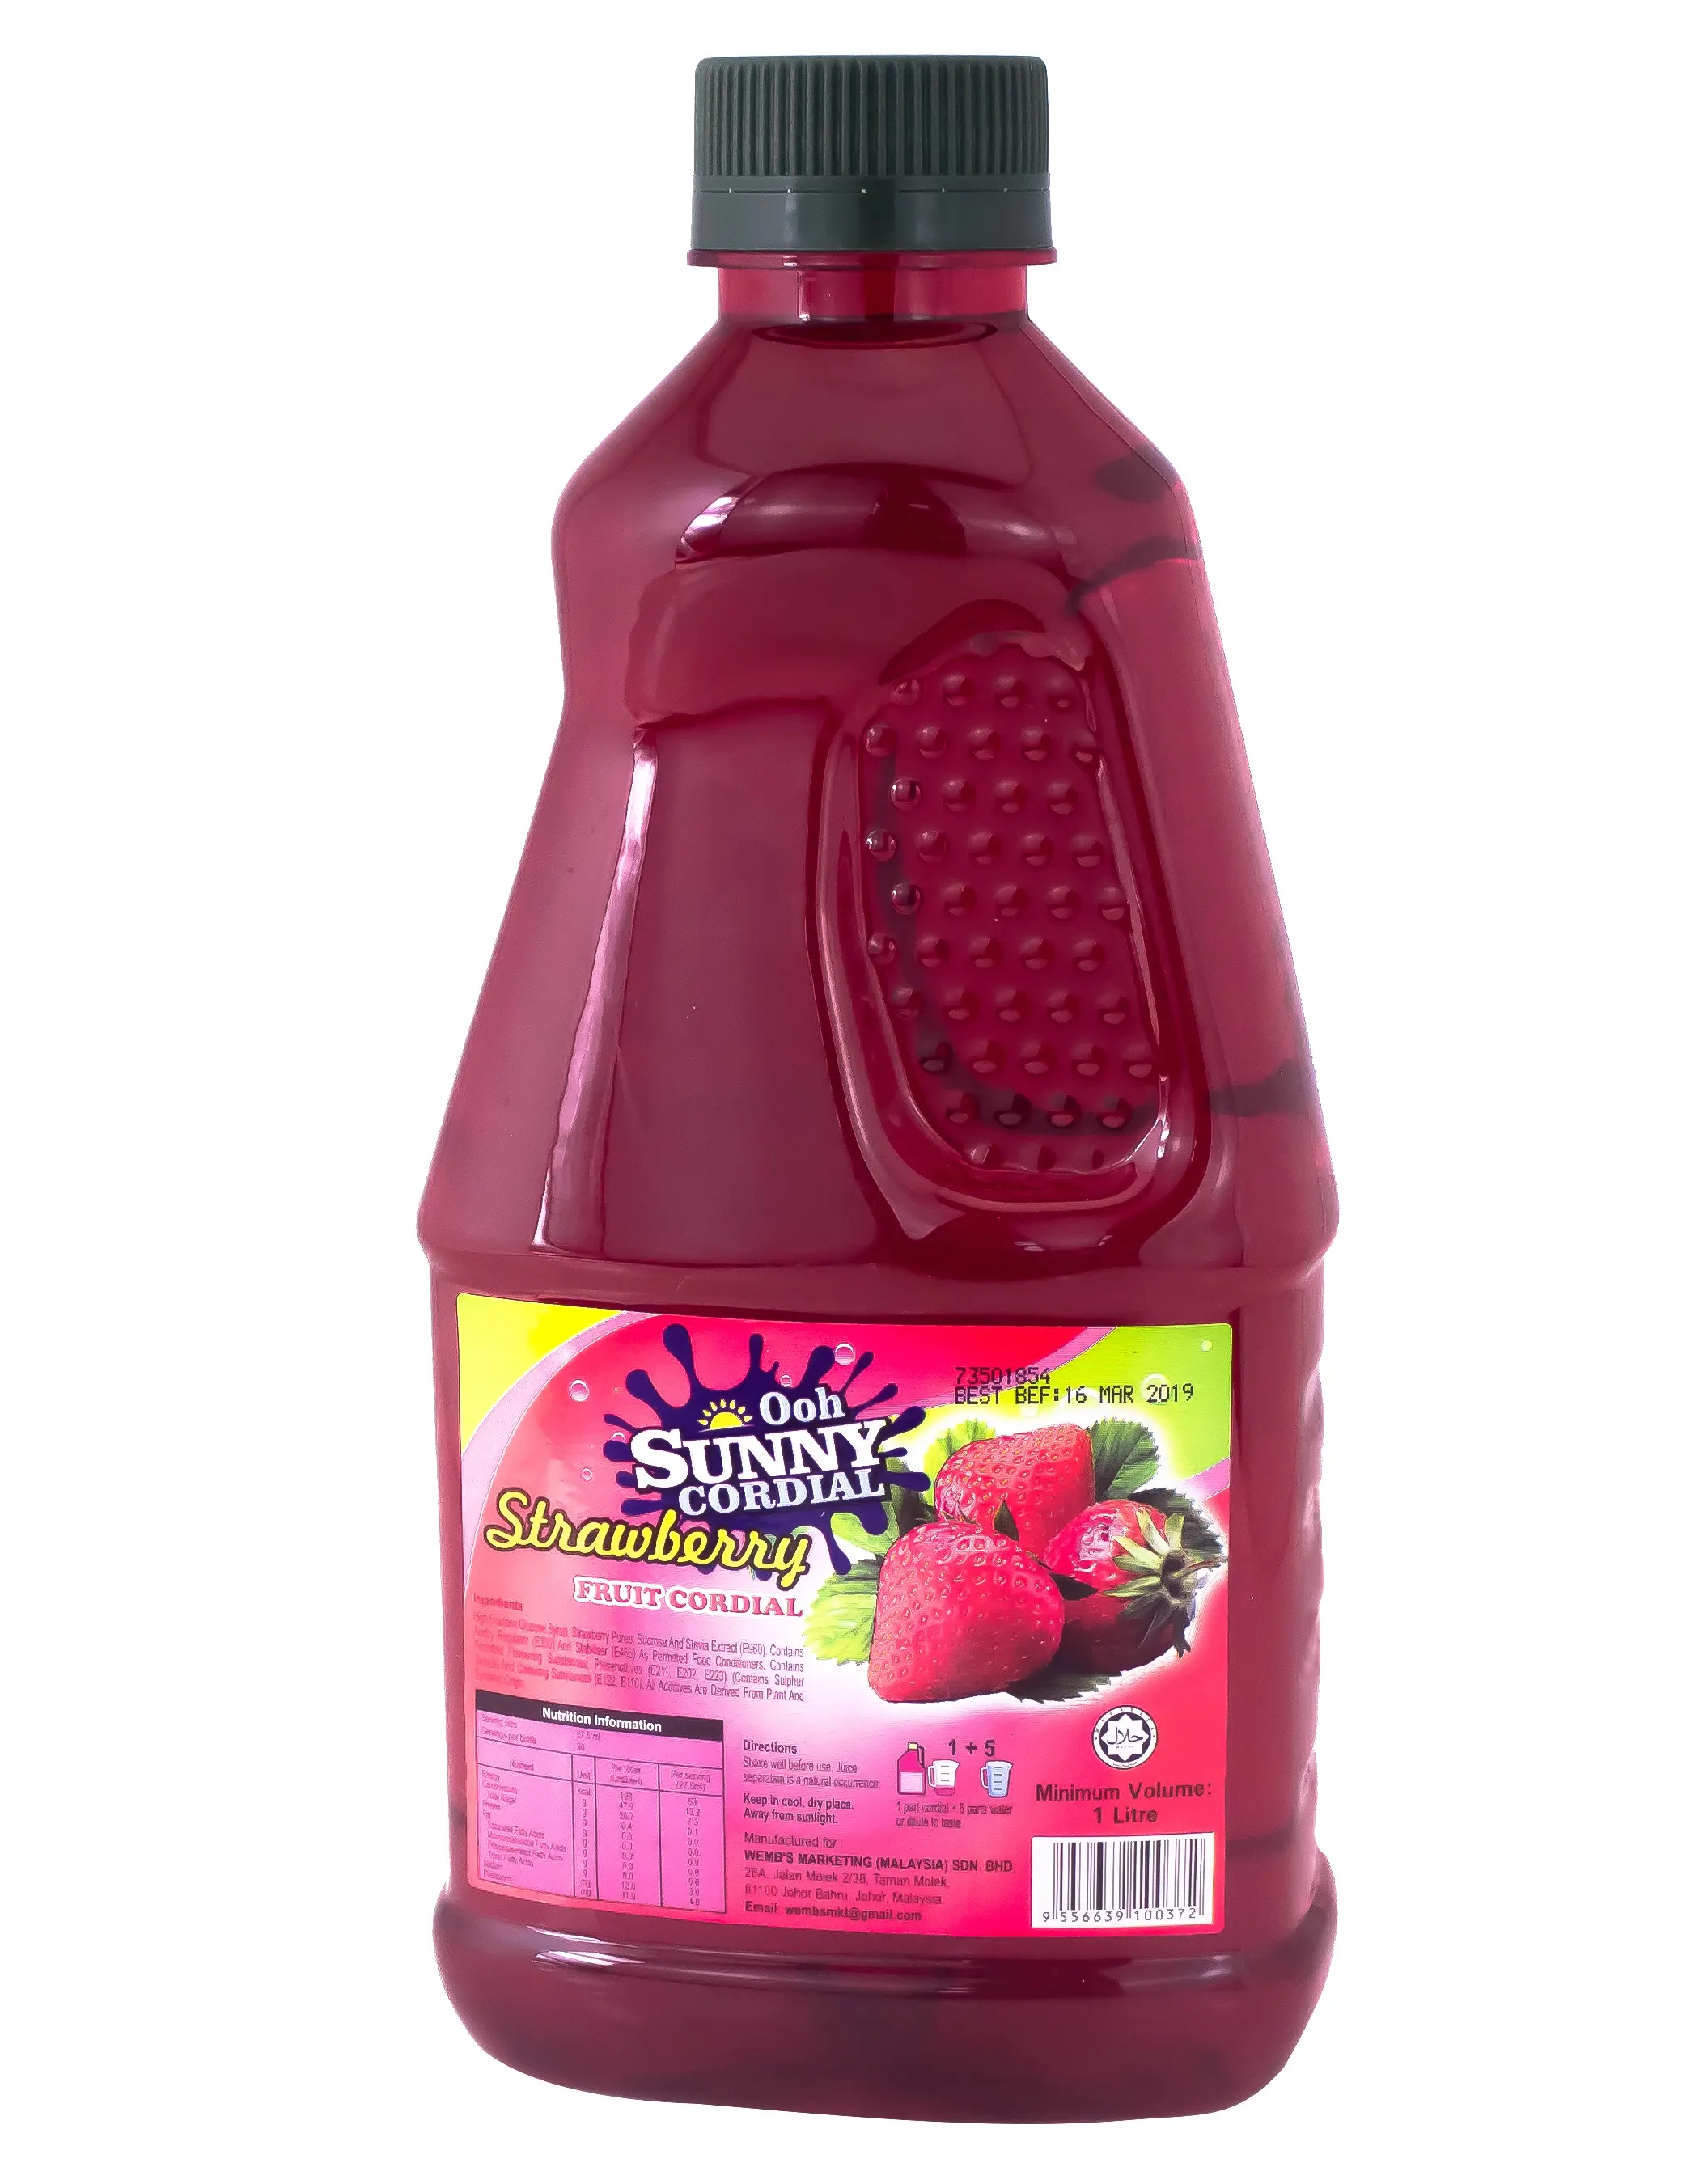 Ooh Sunny Cordial Concentrate Real Strawberry Fruit Juice